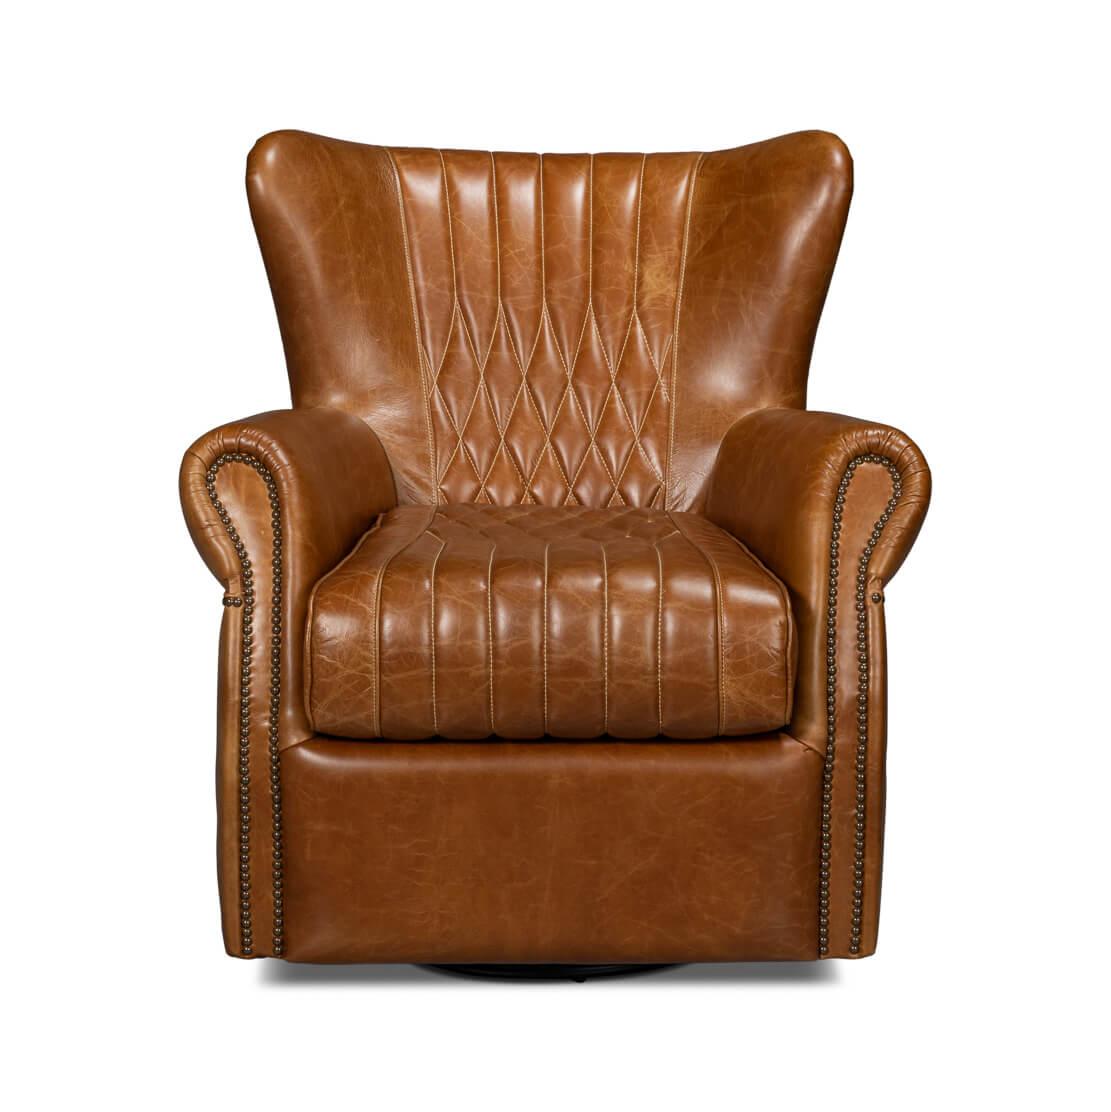 A masterpiece that encapsulates timeless charm and contemporary comfort. Crafted with high-quality Cuba Brown leather, it boasts iconic diamond quilting and channels that bring an air of aristocratic elegance to any room.

With a high winged